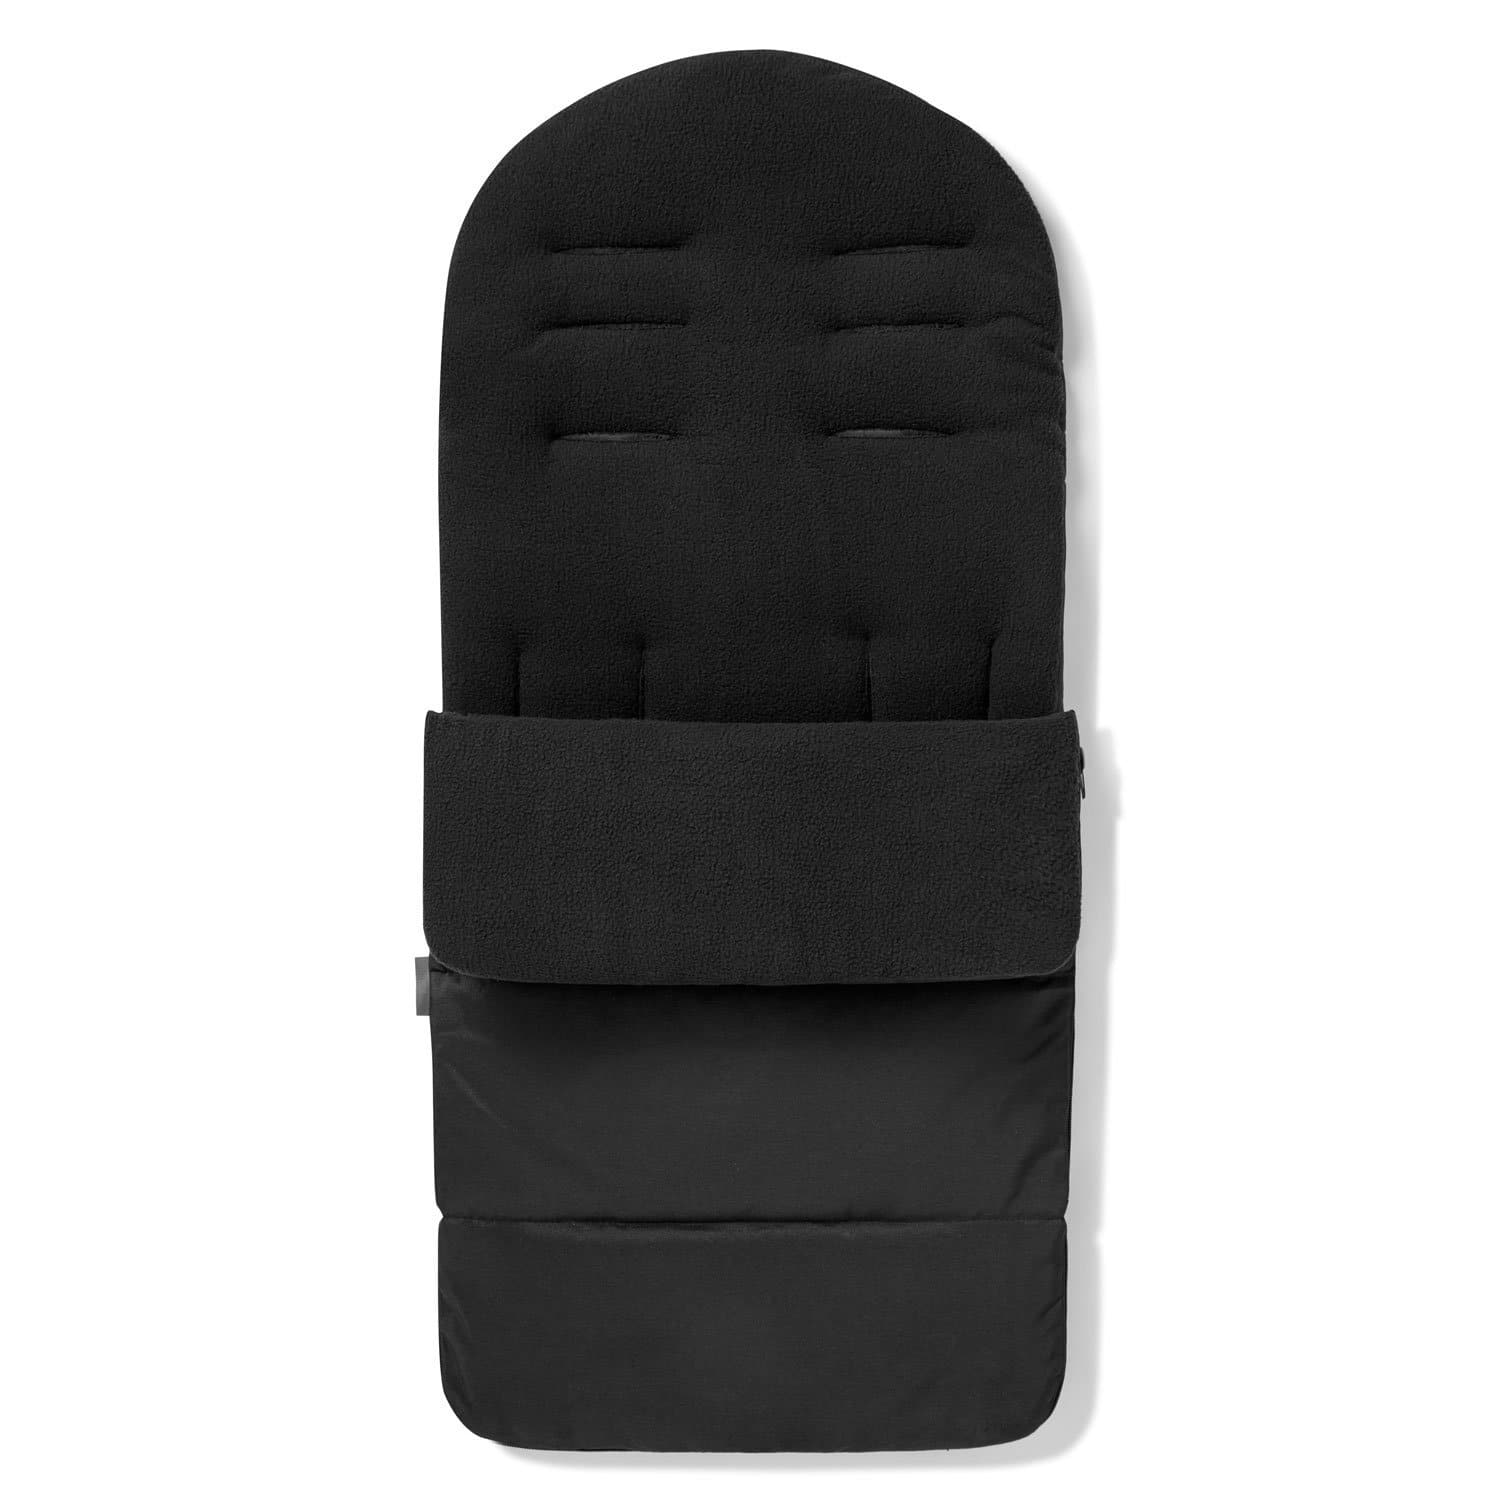 Premium Footmuff / Cosy Toes Compatible with Mothercare - Black Jack / Fits All Models | For Your Little One